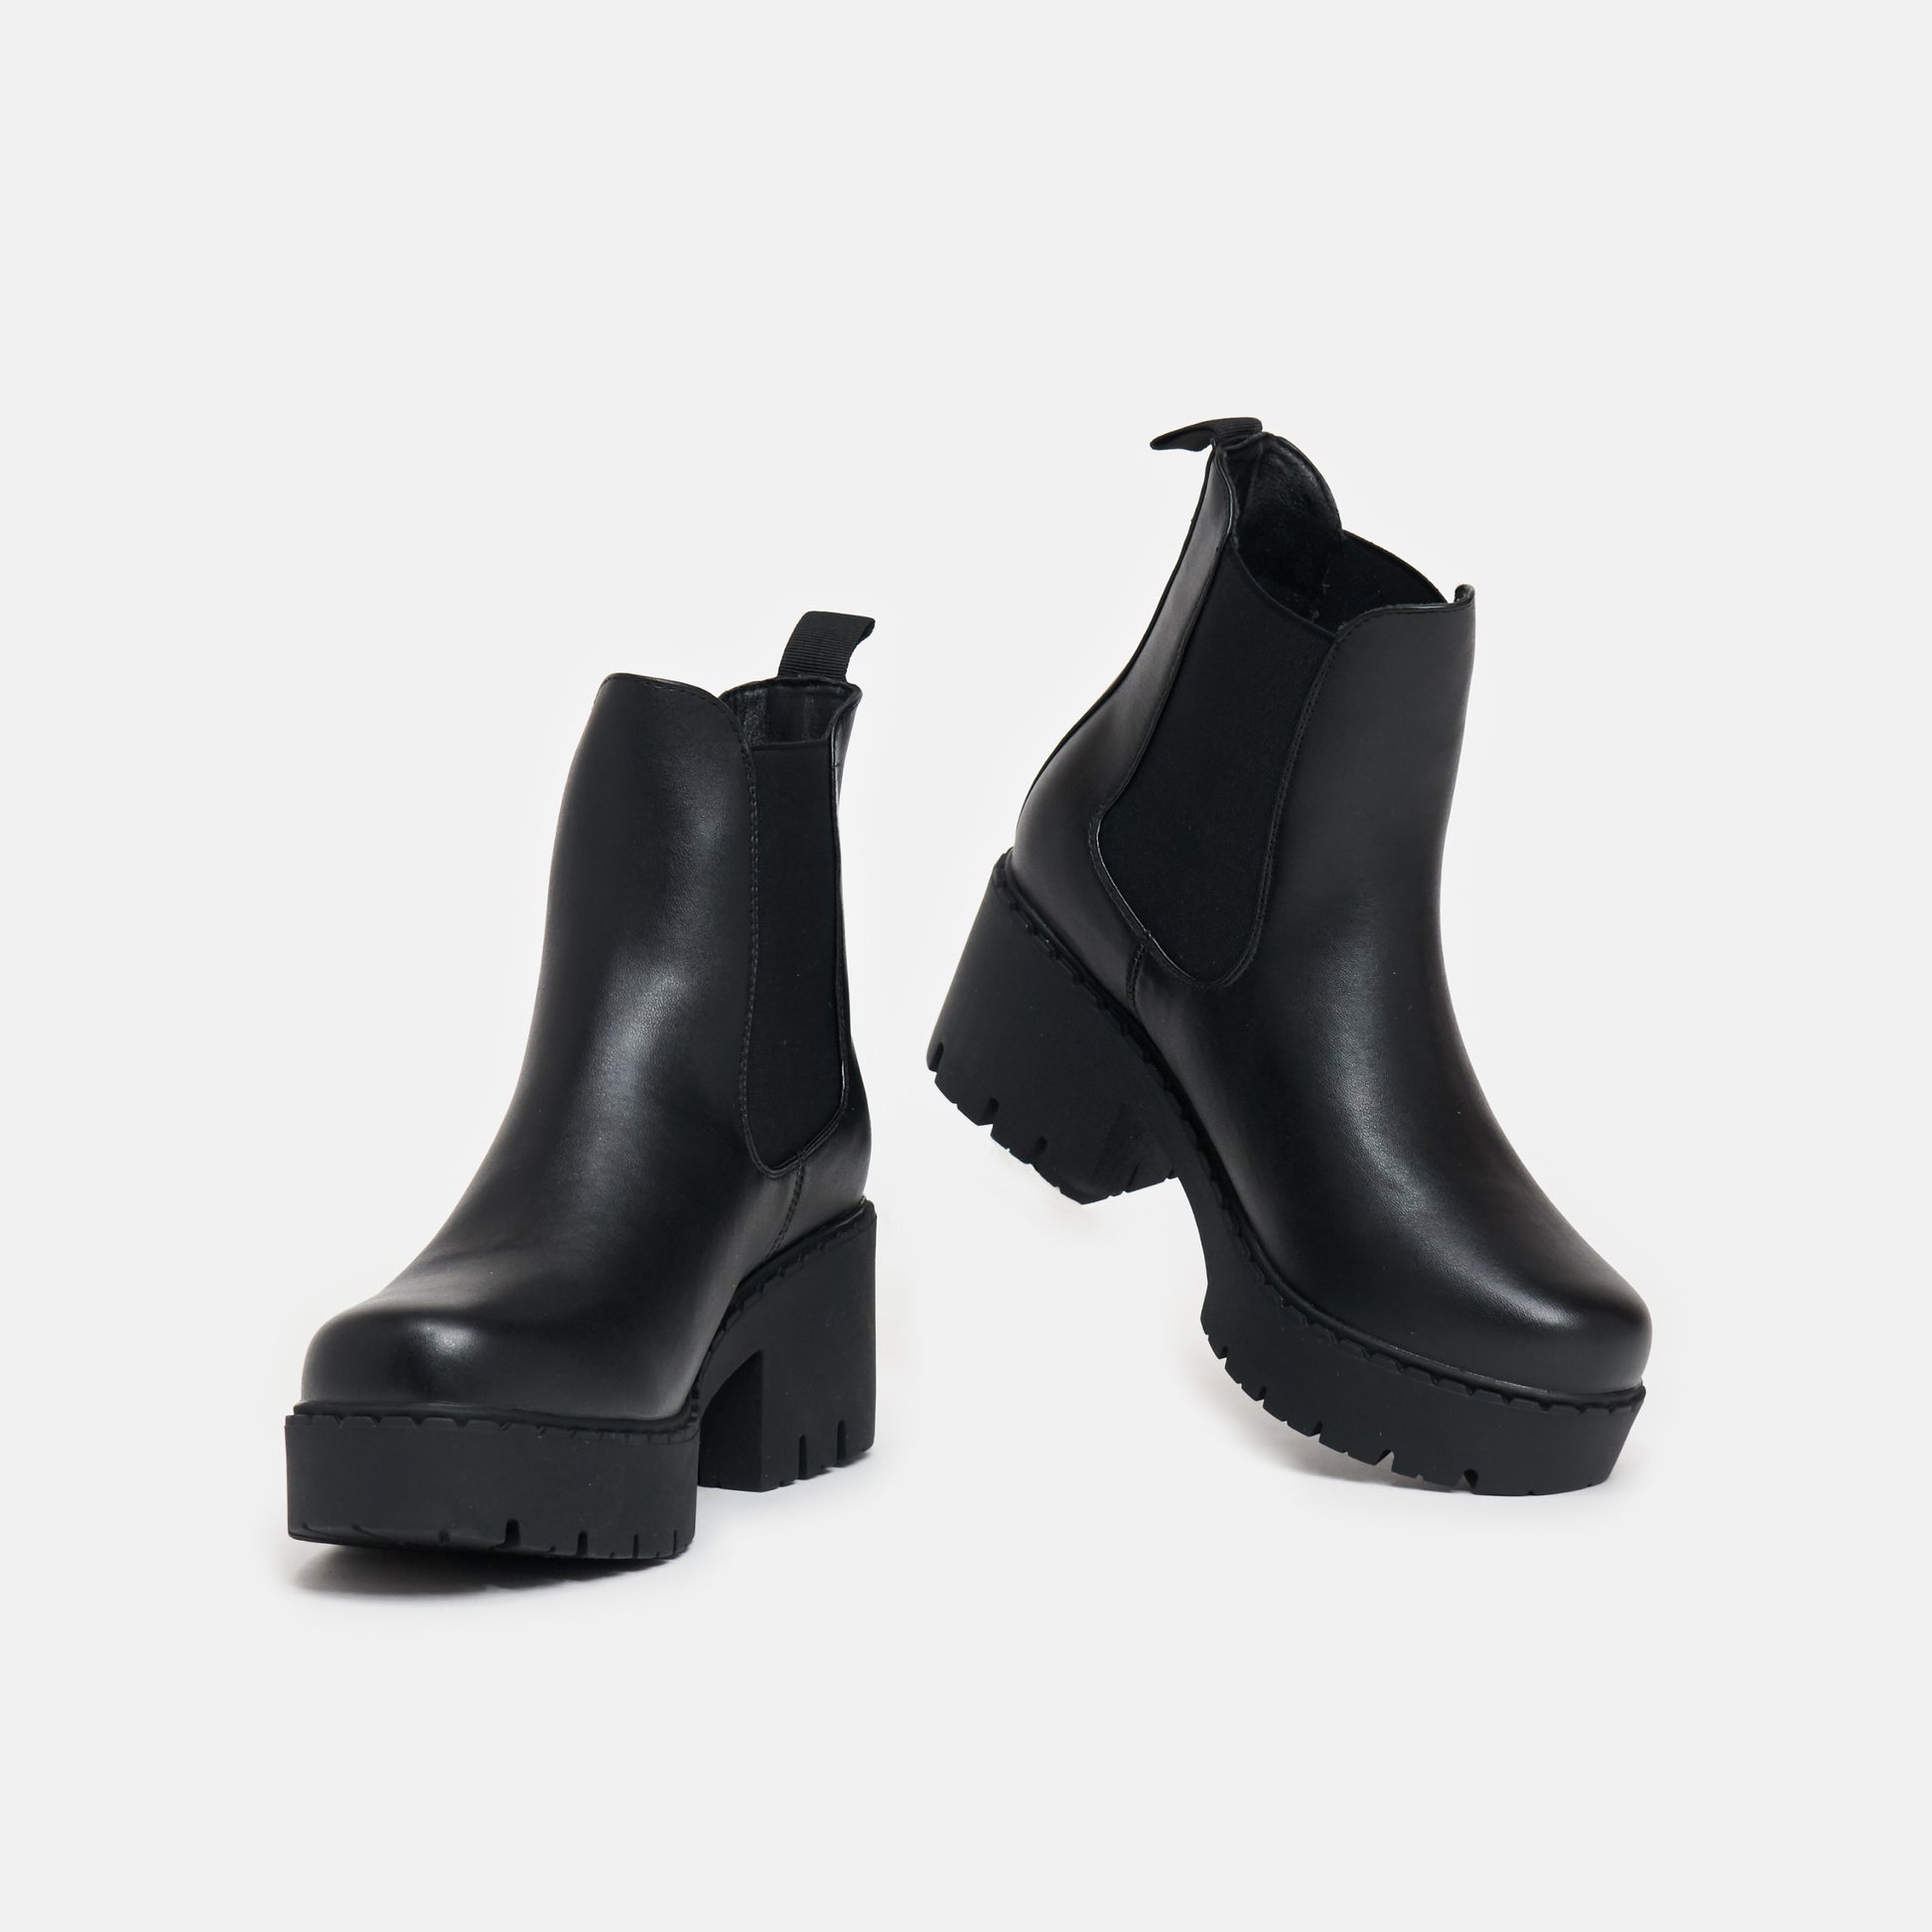 Orson Switch Chelsea Boots - Ankle Boots - KOI Footwear - Black - Front and Side View